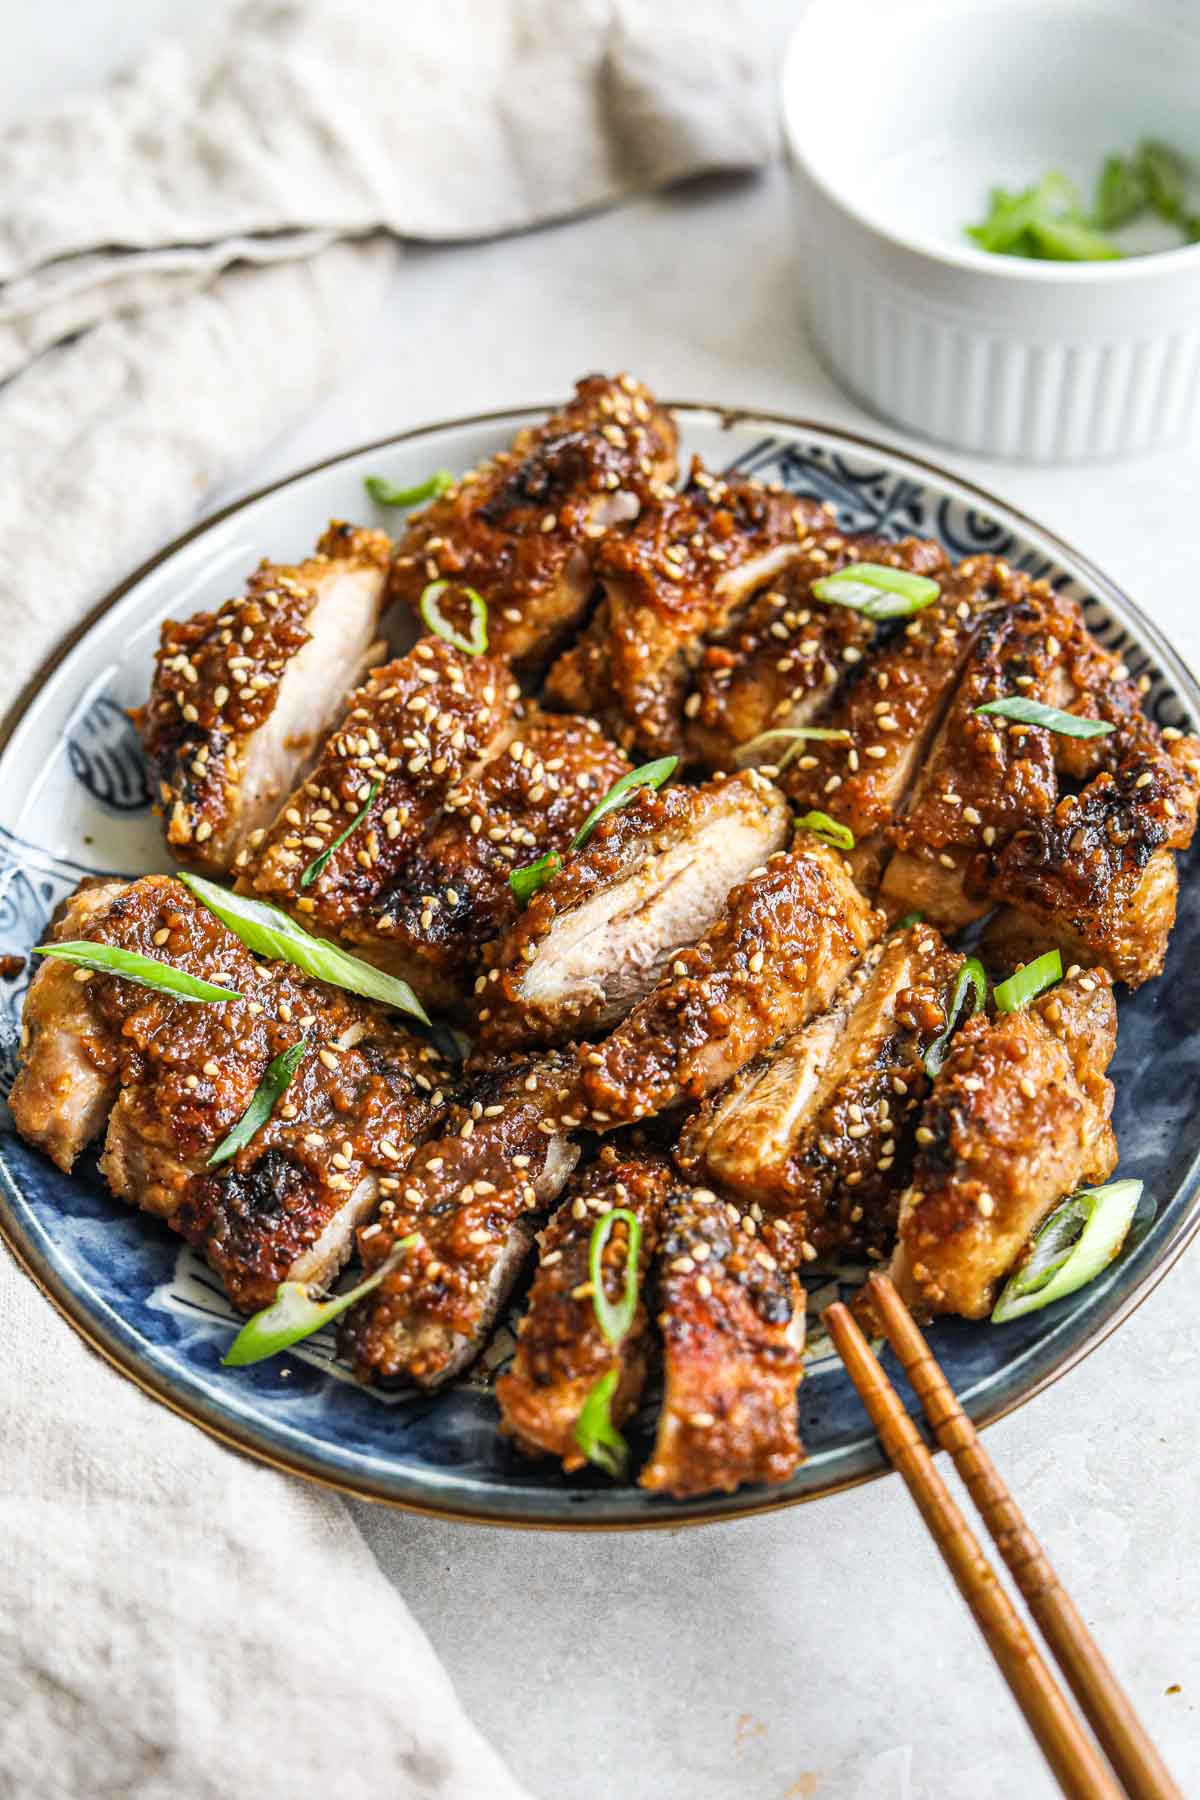 Juicy jidori chicken thighs simmered in a miso, soy sauce, sake sauce and topped with sesame seeds and scallions.